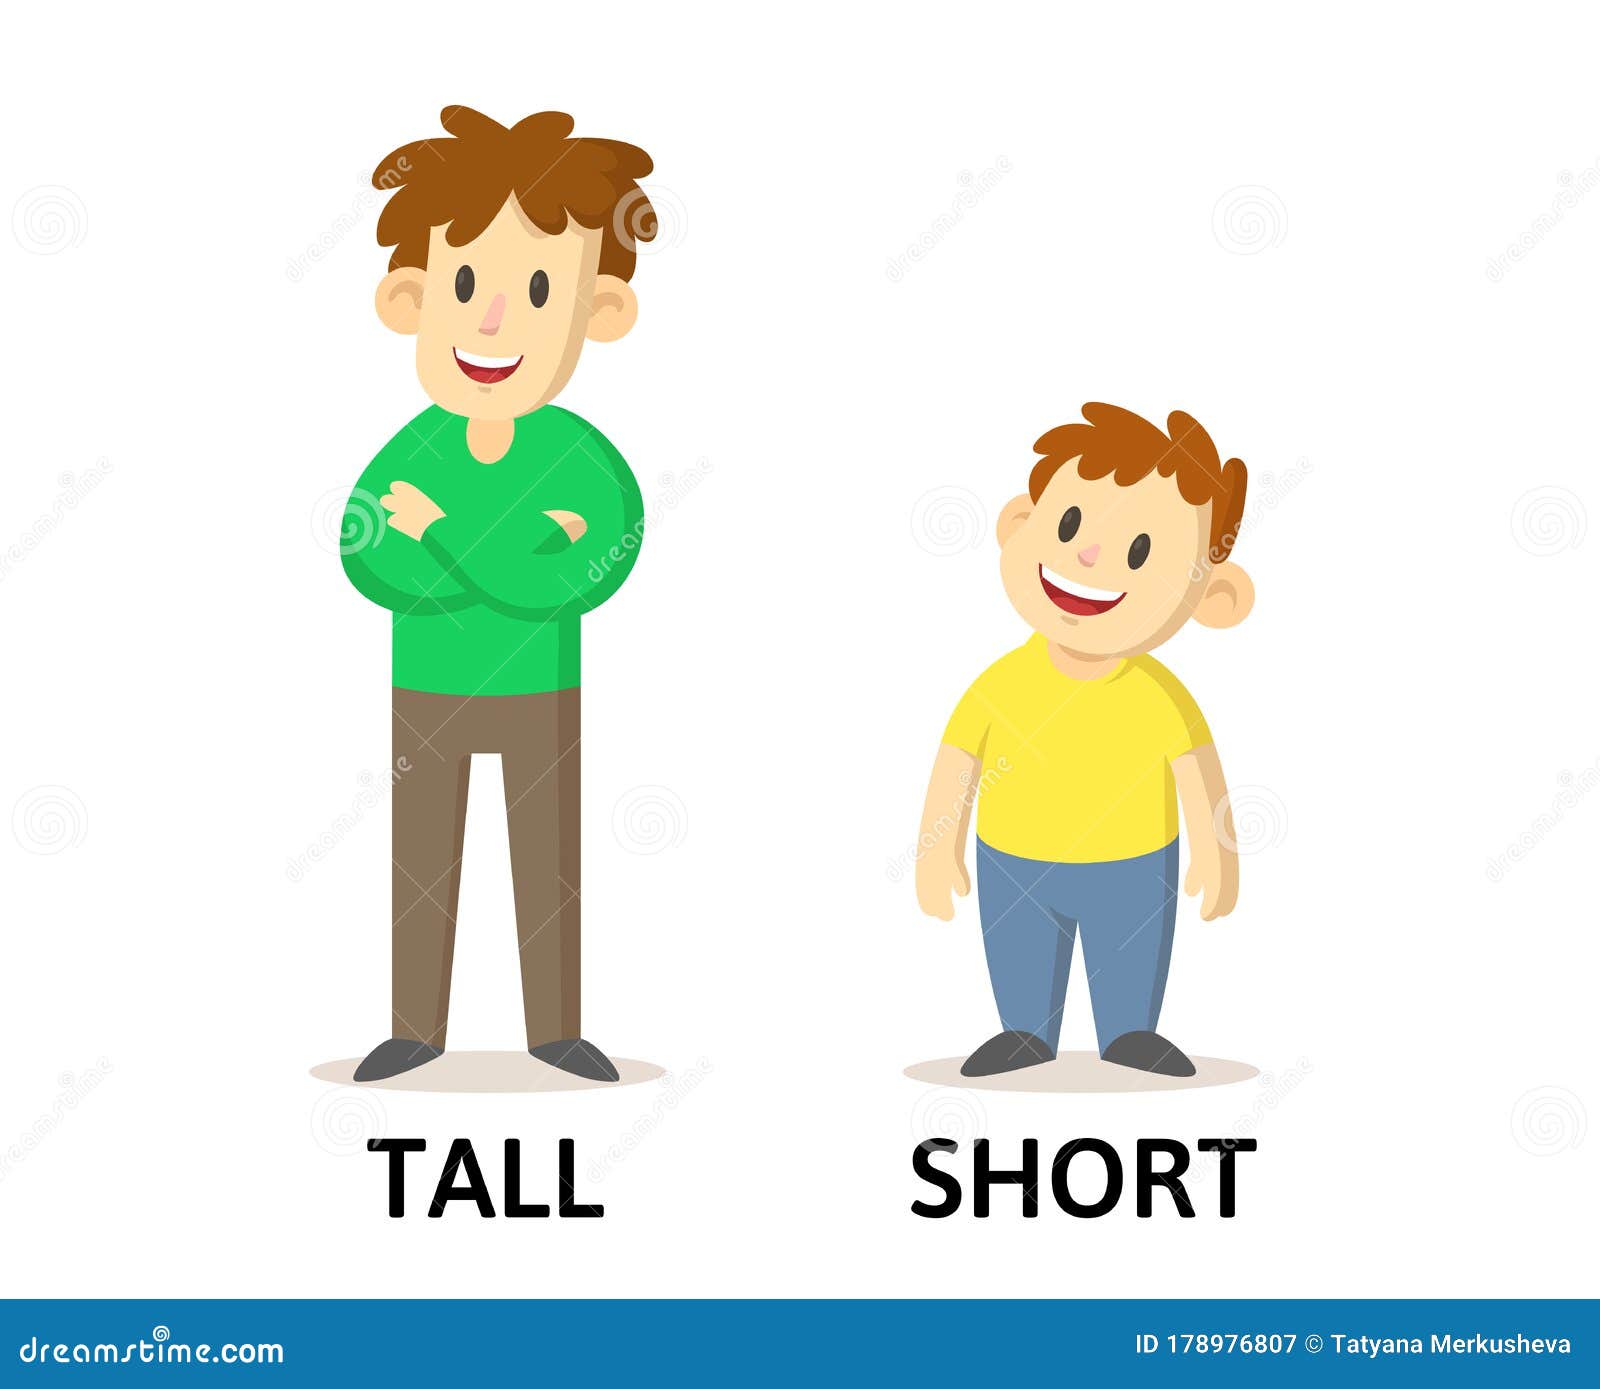 words tall and short flashcard with cartoon characters. opposite adjectives explanation card. flat  